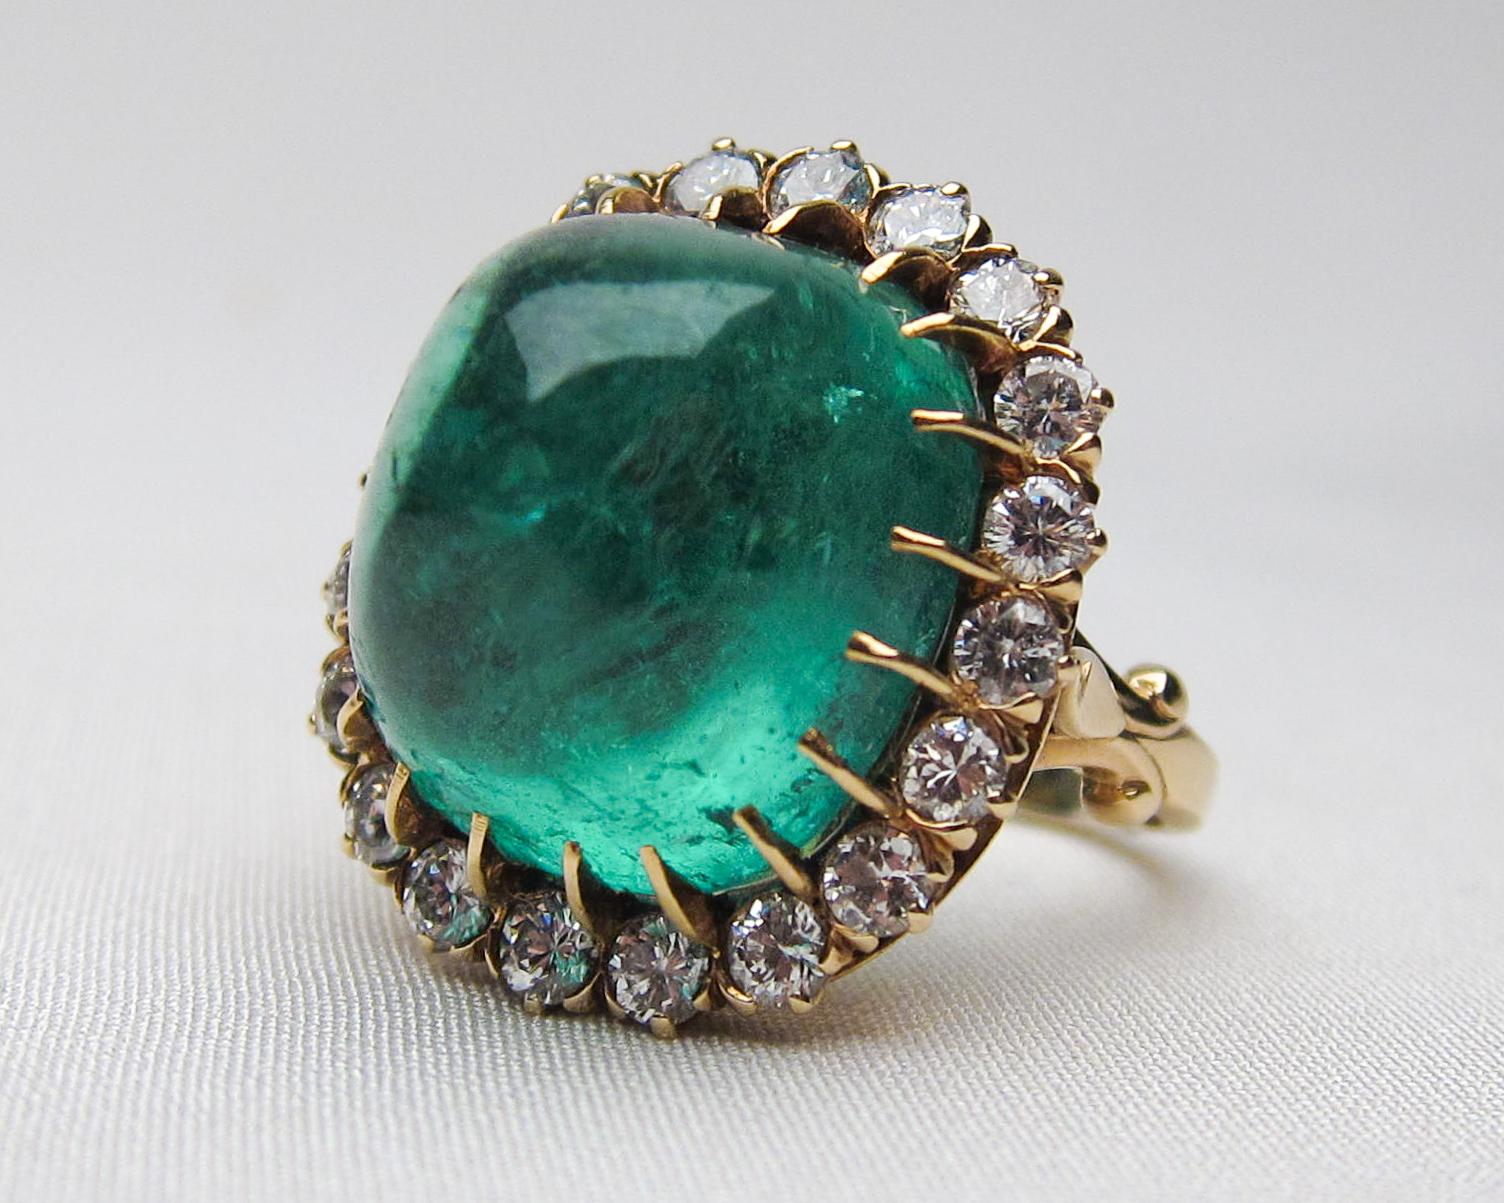 Women's 14K Gold 1.60 Ct Diamond and 27.60 Ct Emerald Cabochon Cocktail Ring, Circa 1940 For Sale